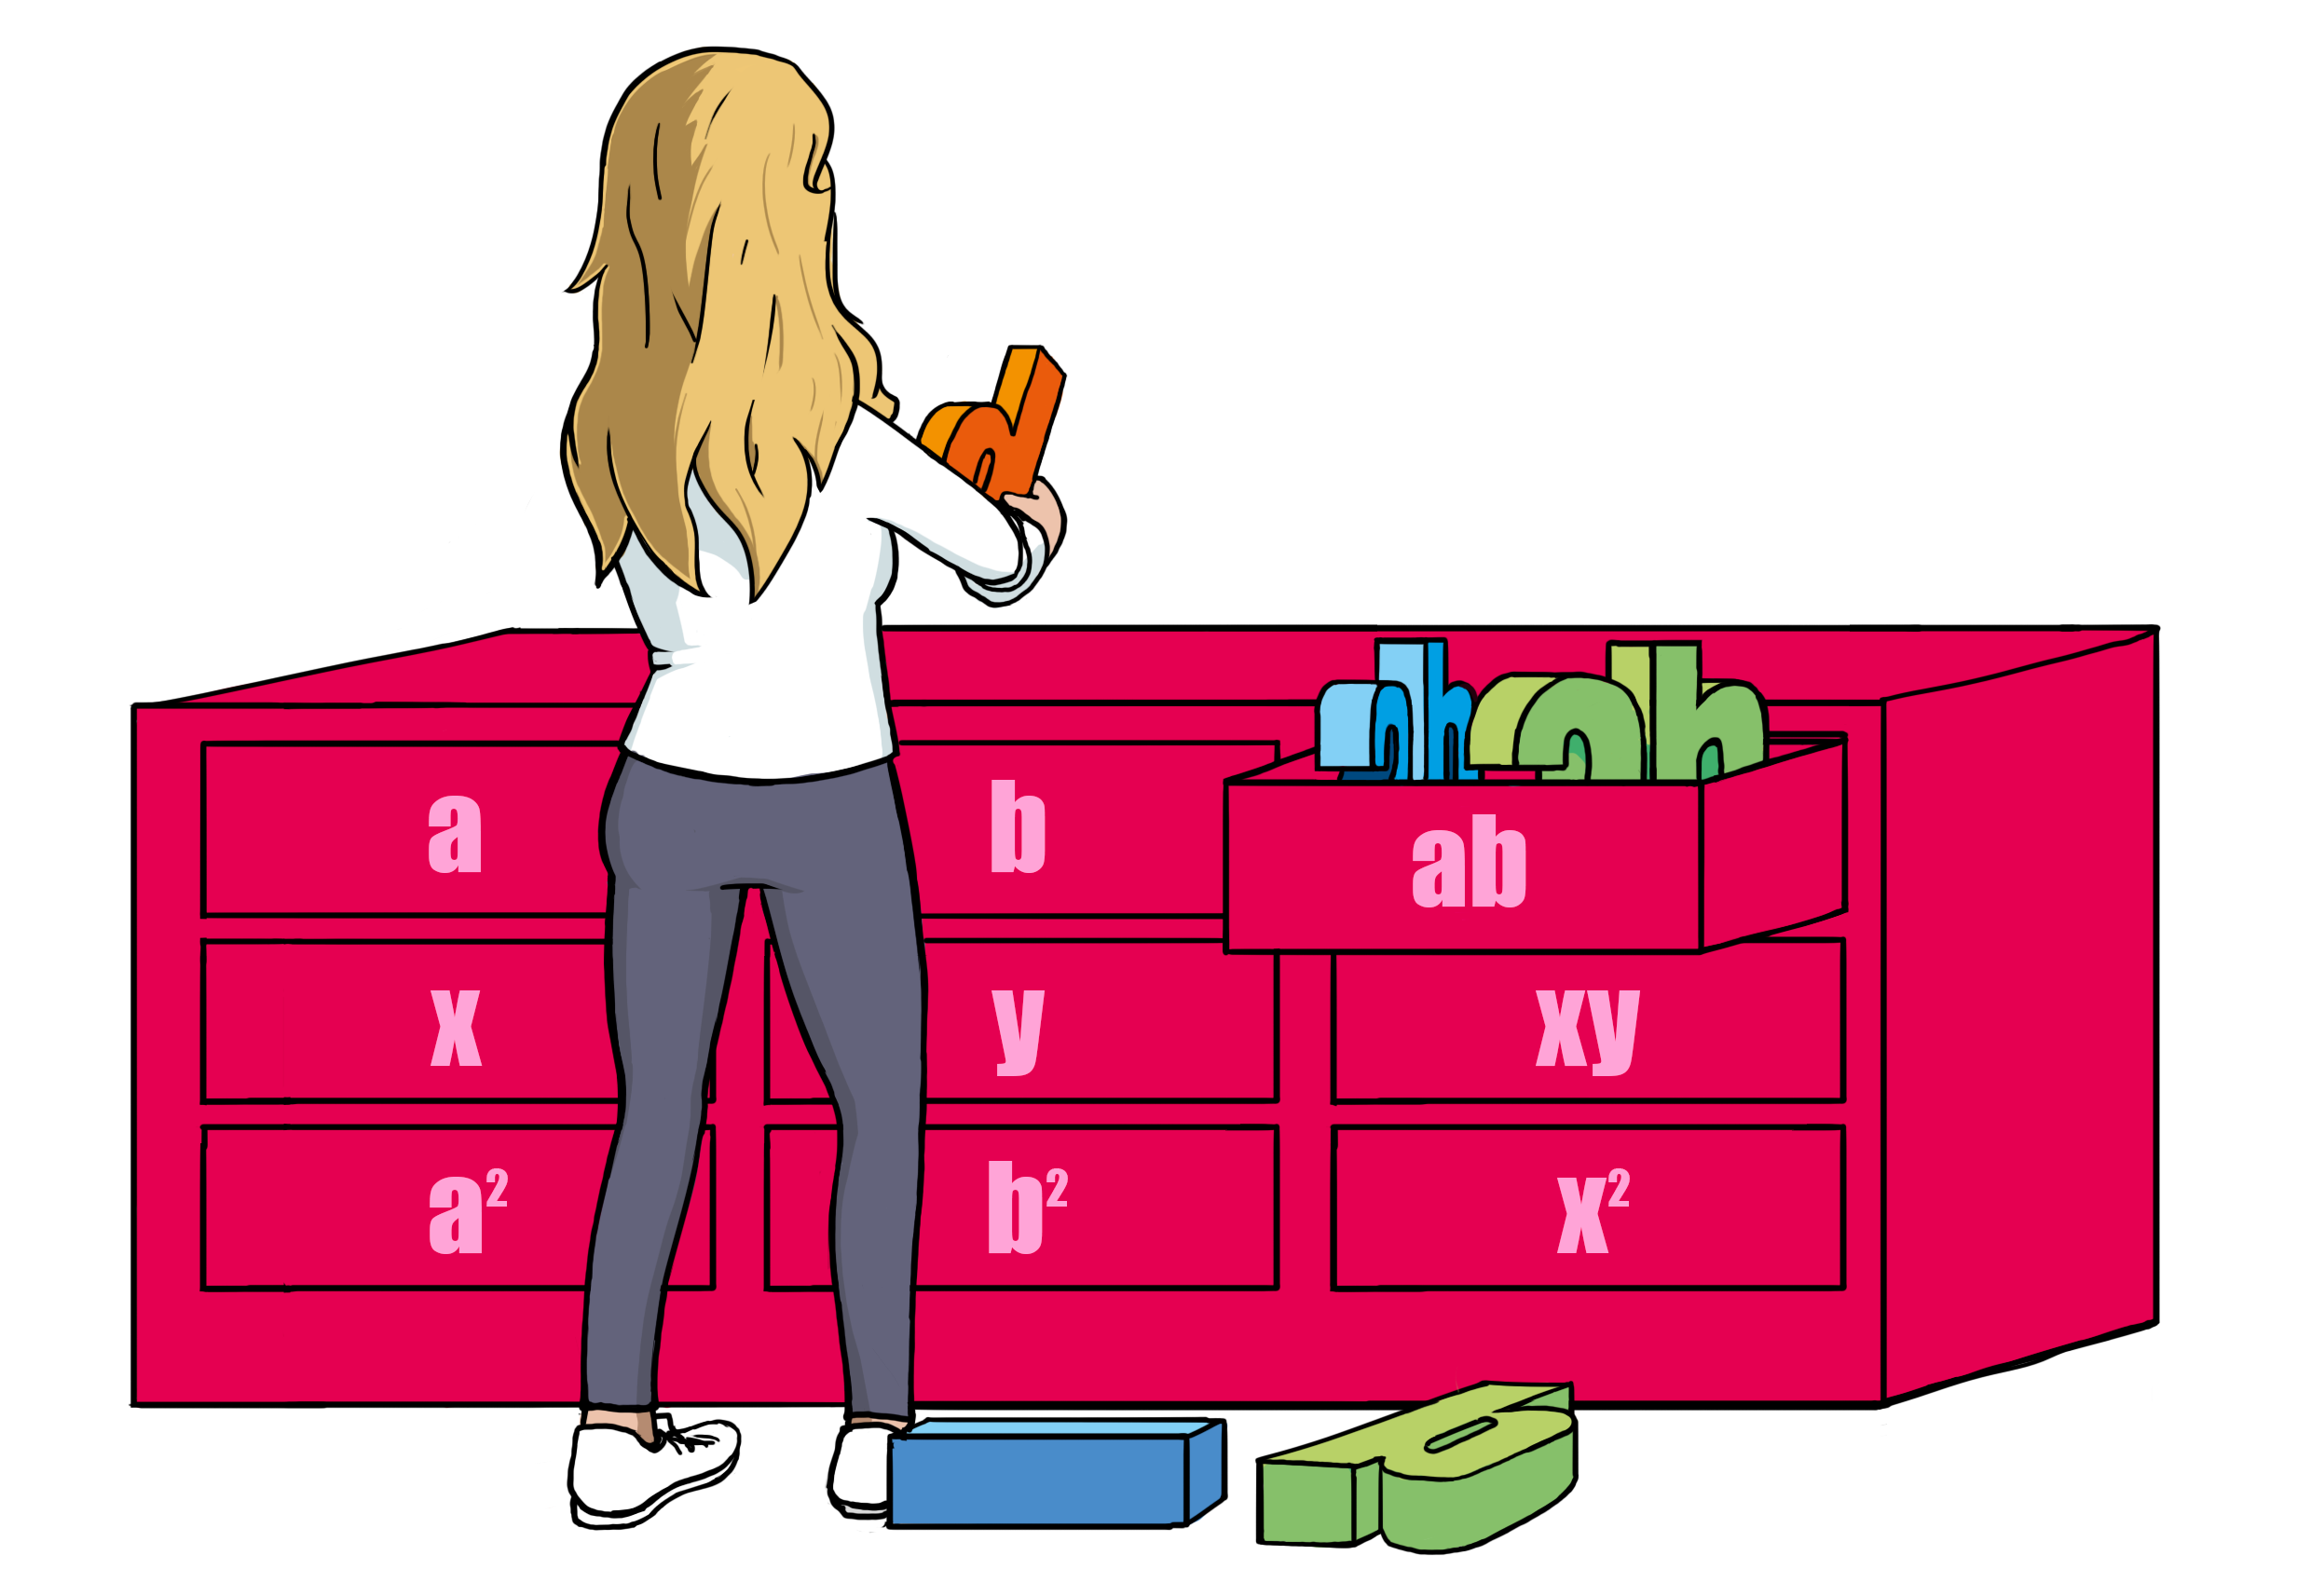 The math master organizing variables in drawers